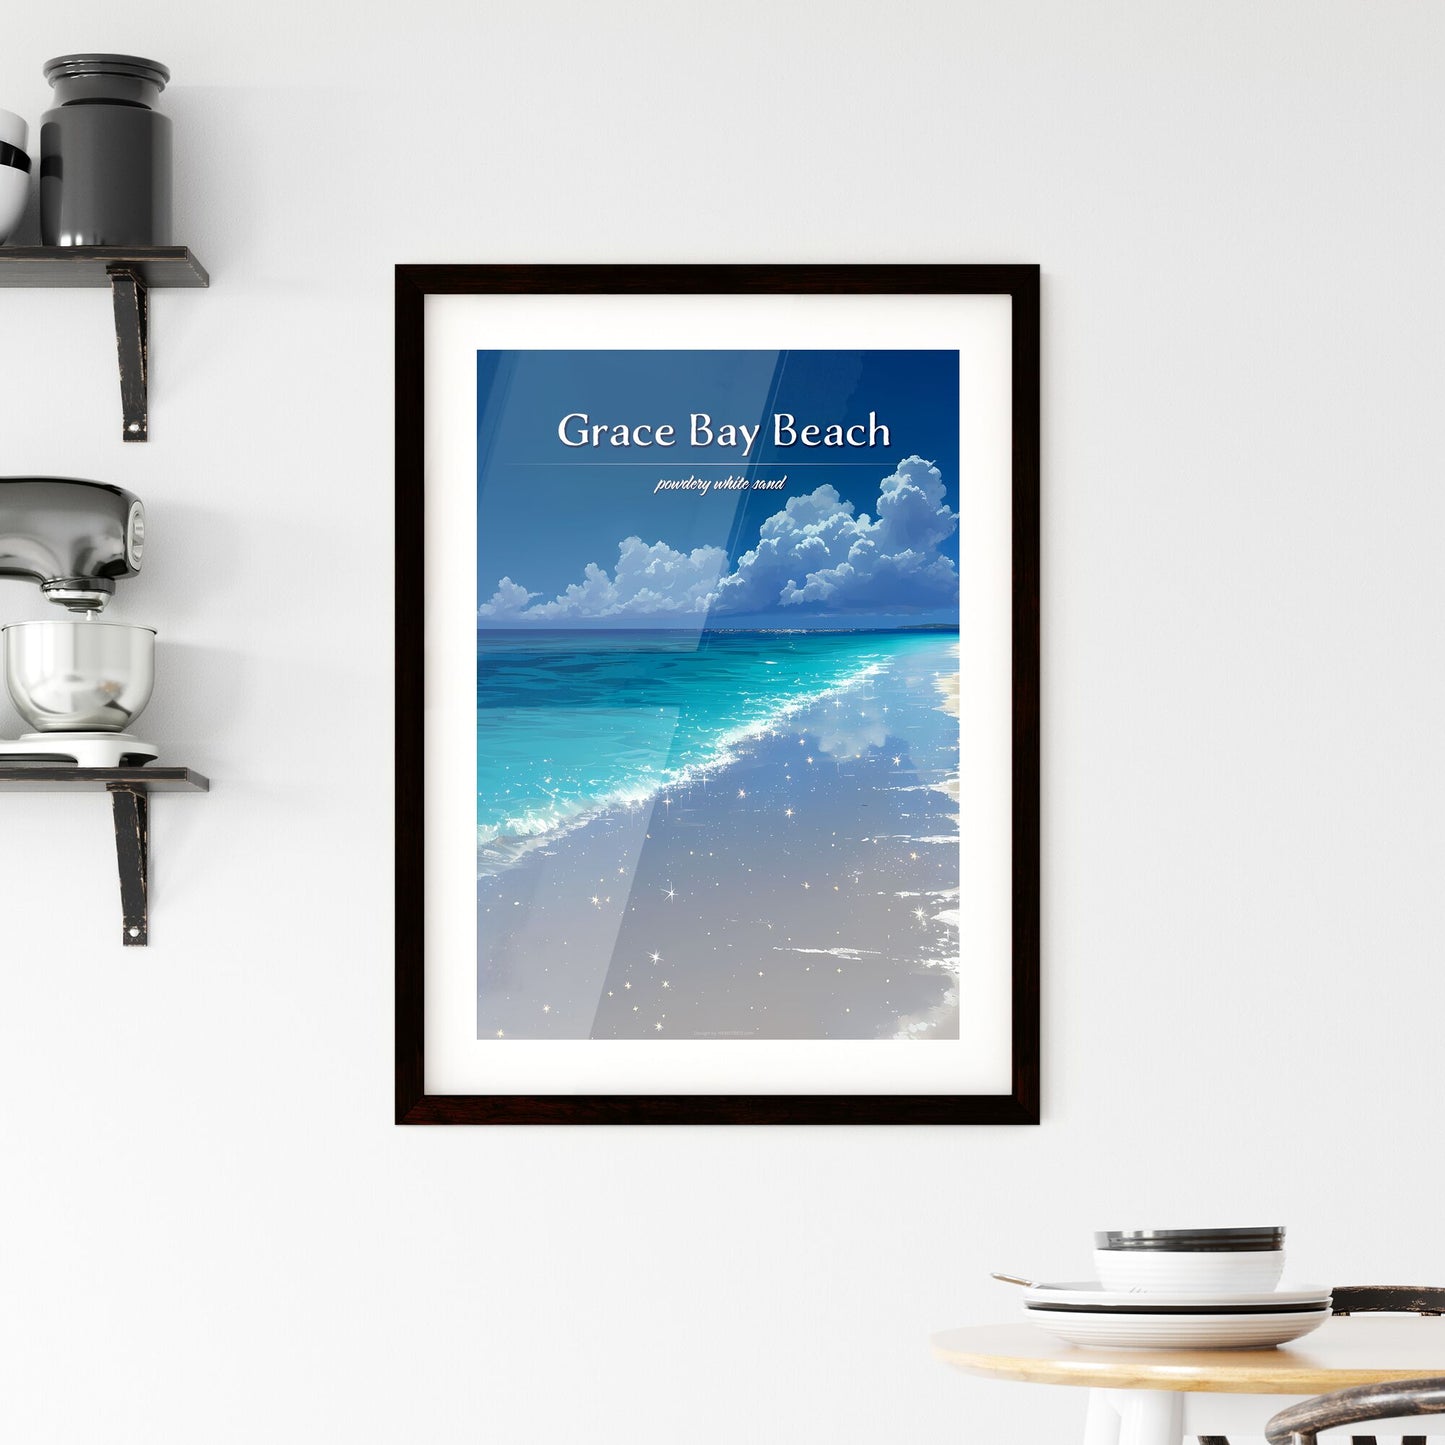 Grace Bay Beach - Art print of a beach with blue water and clouds Default Title